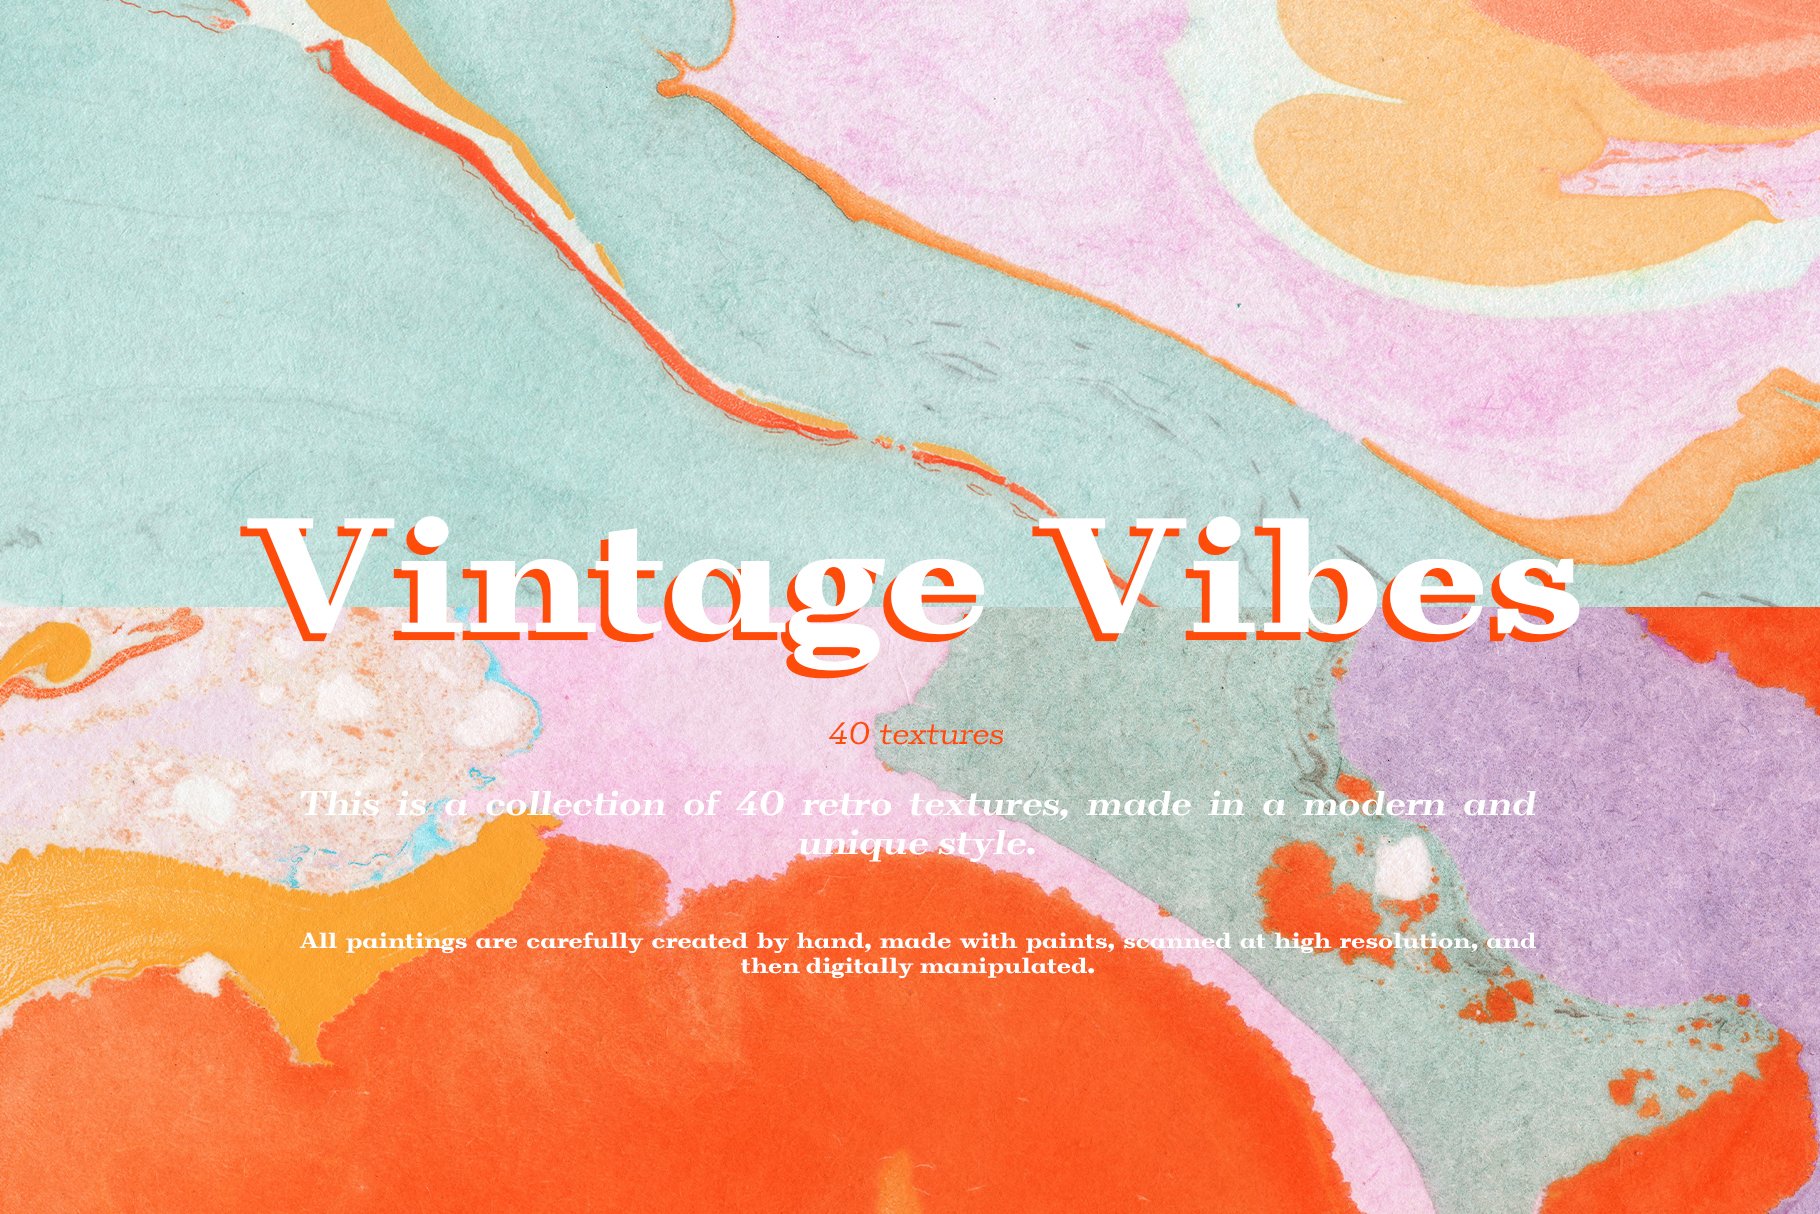 Vintage Vibes Textures cover image.